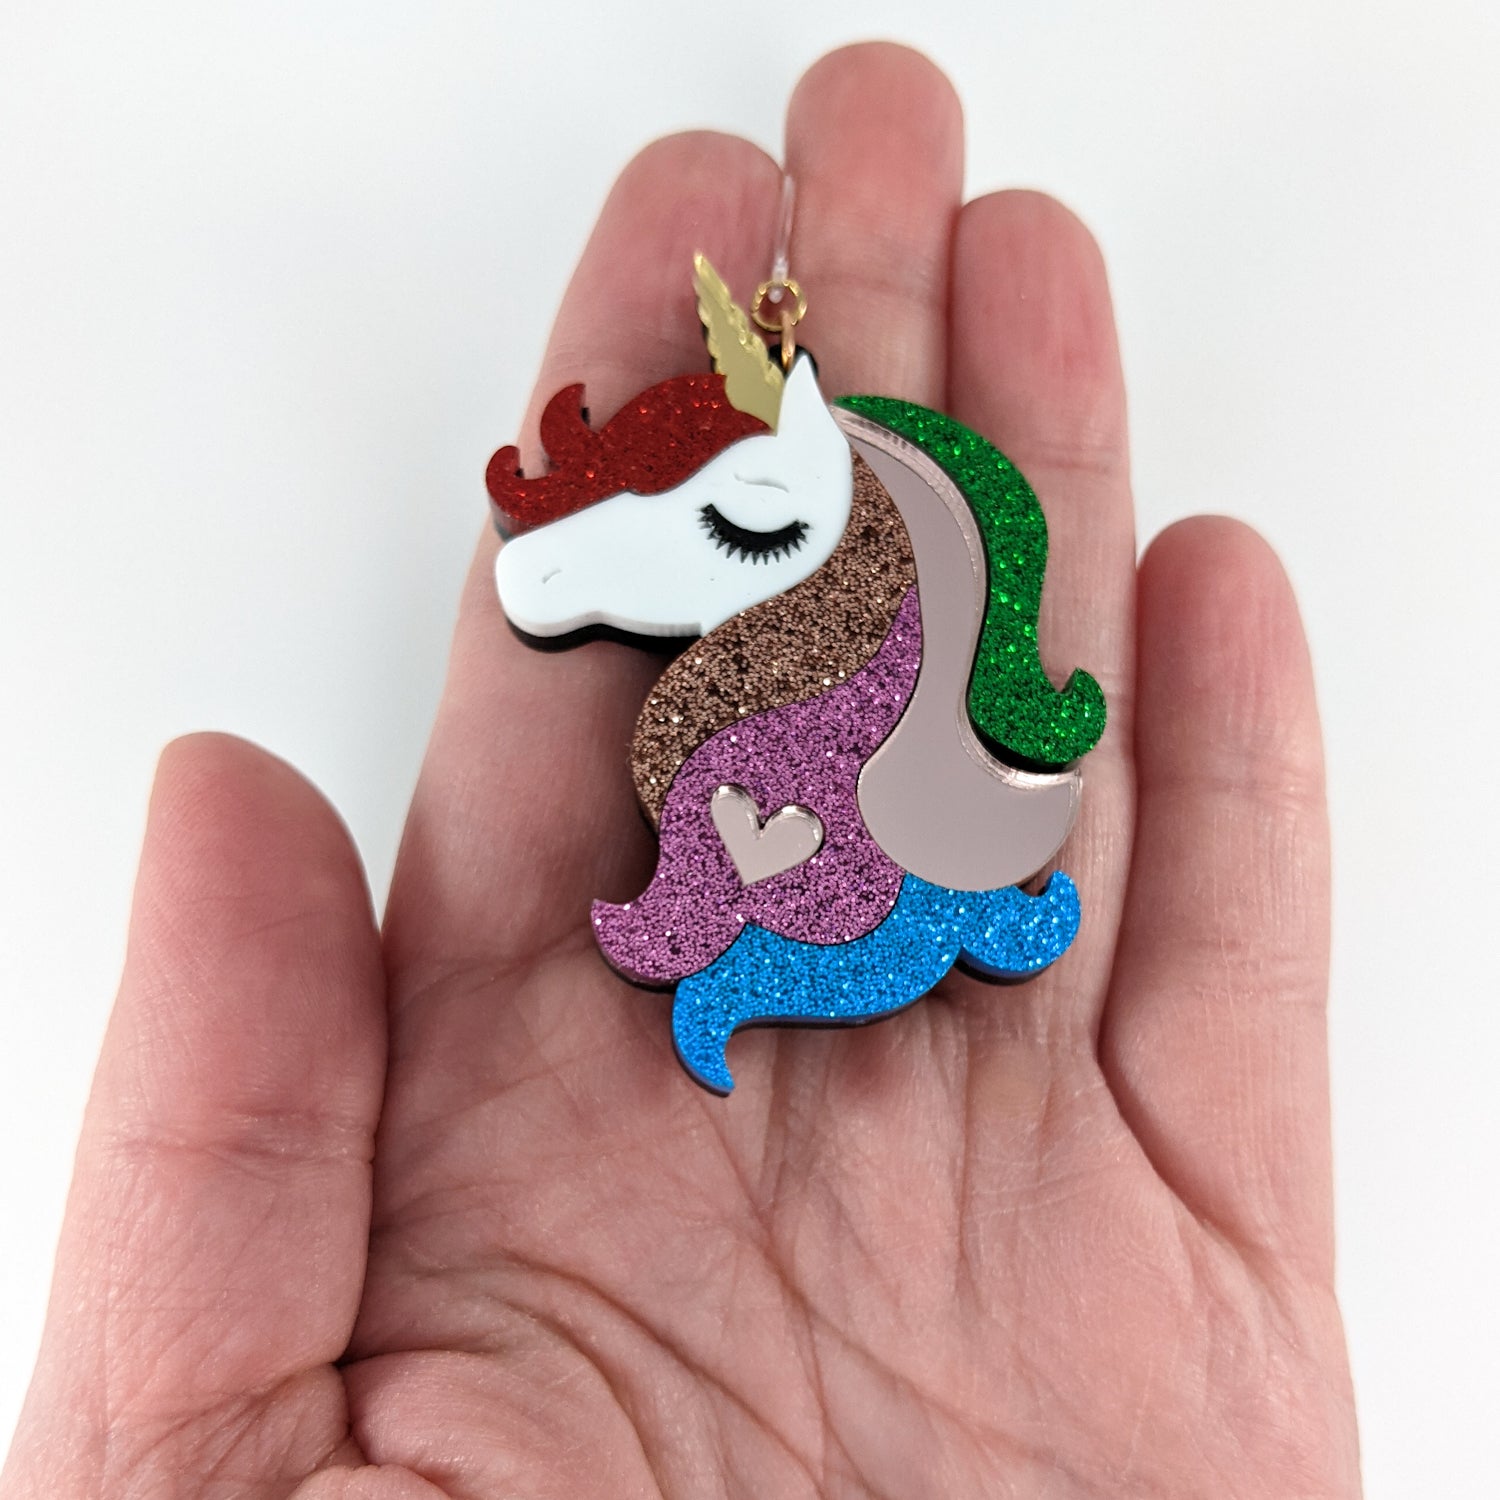 Exaggerated Unicorn Earrings (Dangles) - size comparison hand